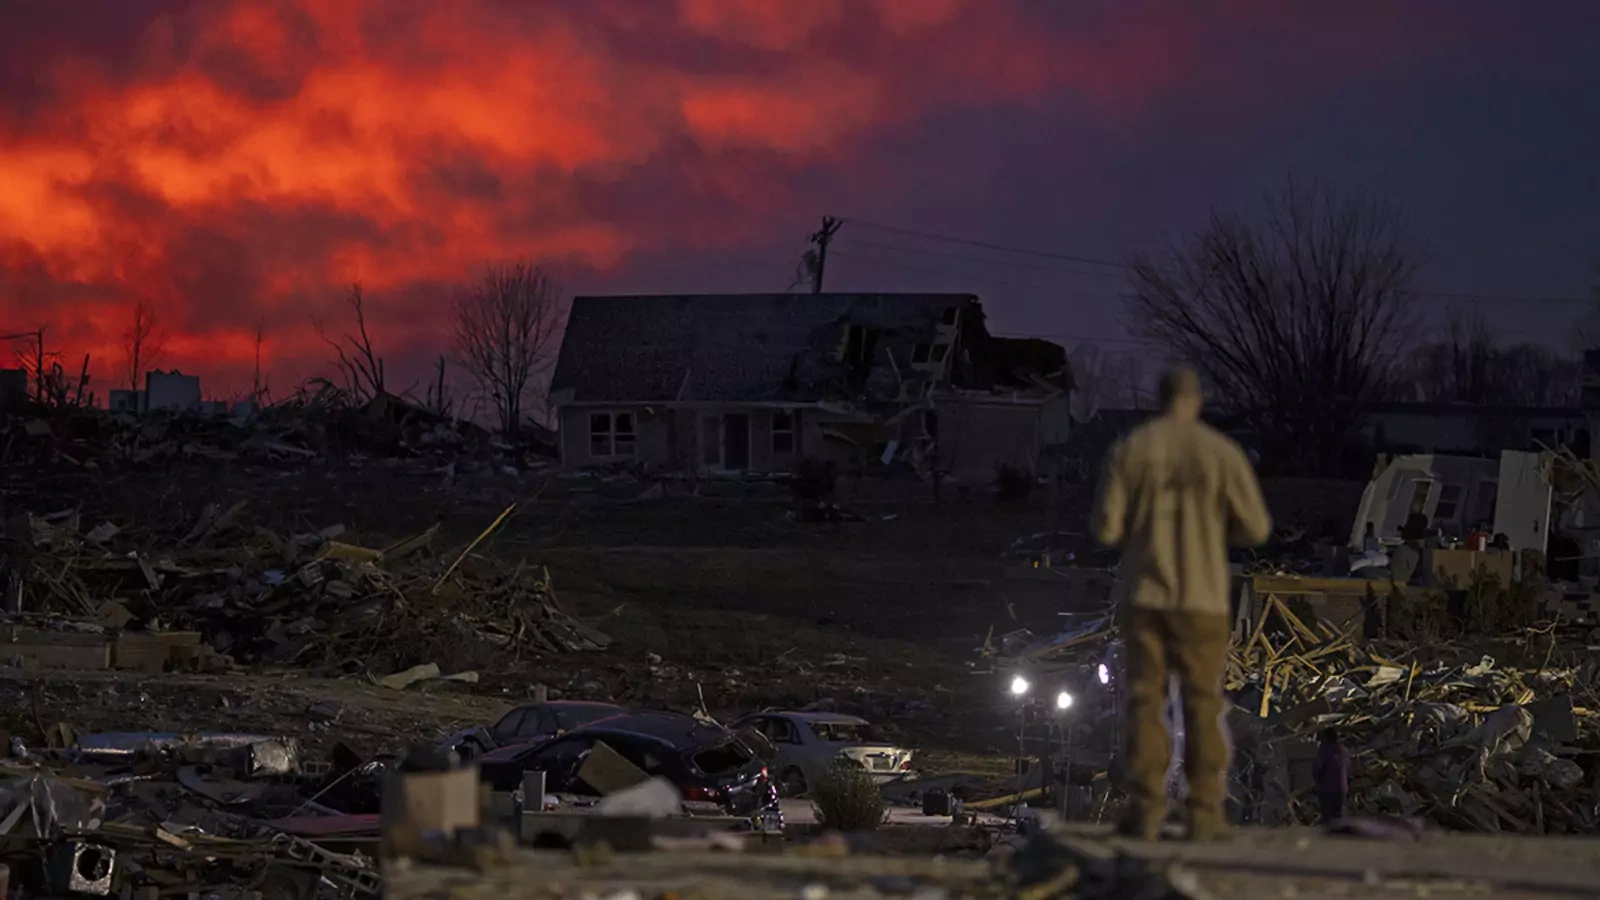 U.S. Disaster Relief at Home and Abroad | Council on Foreign Relations